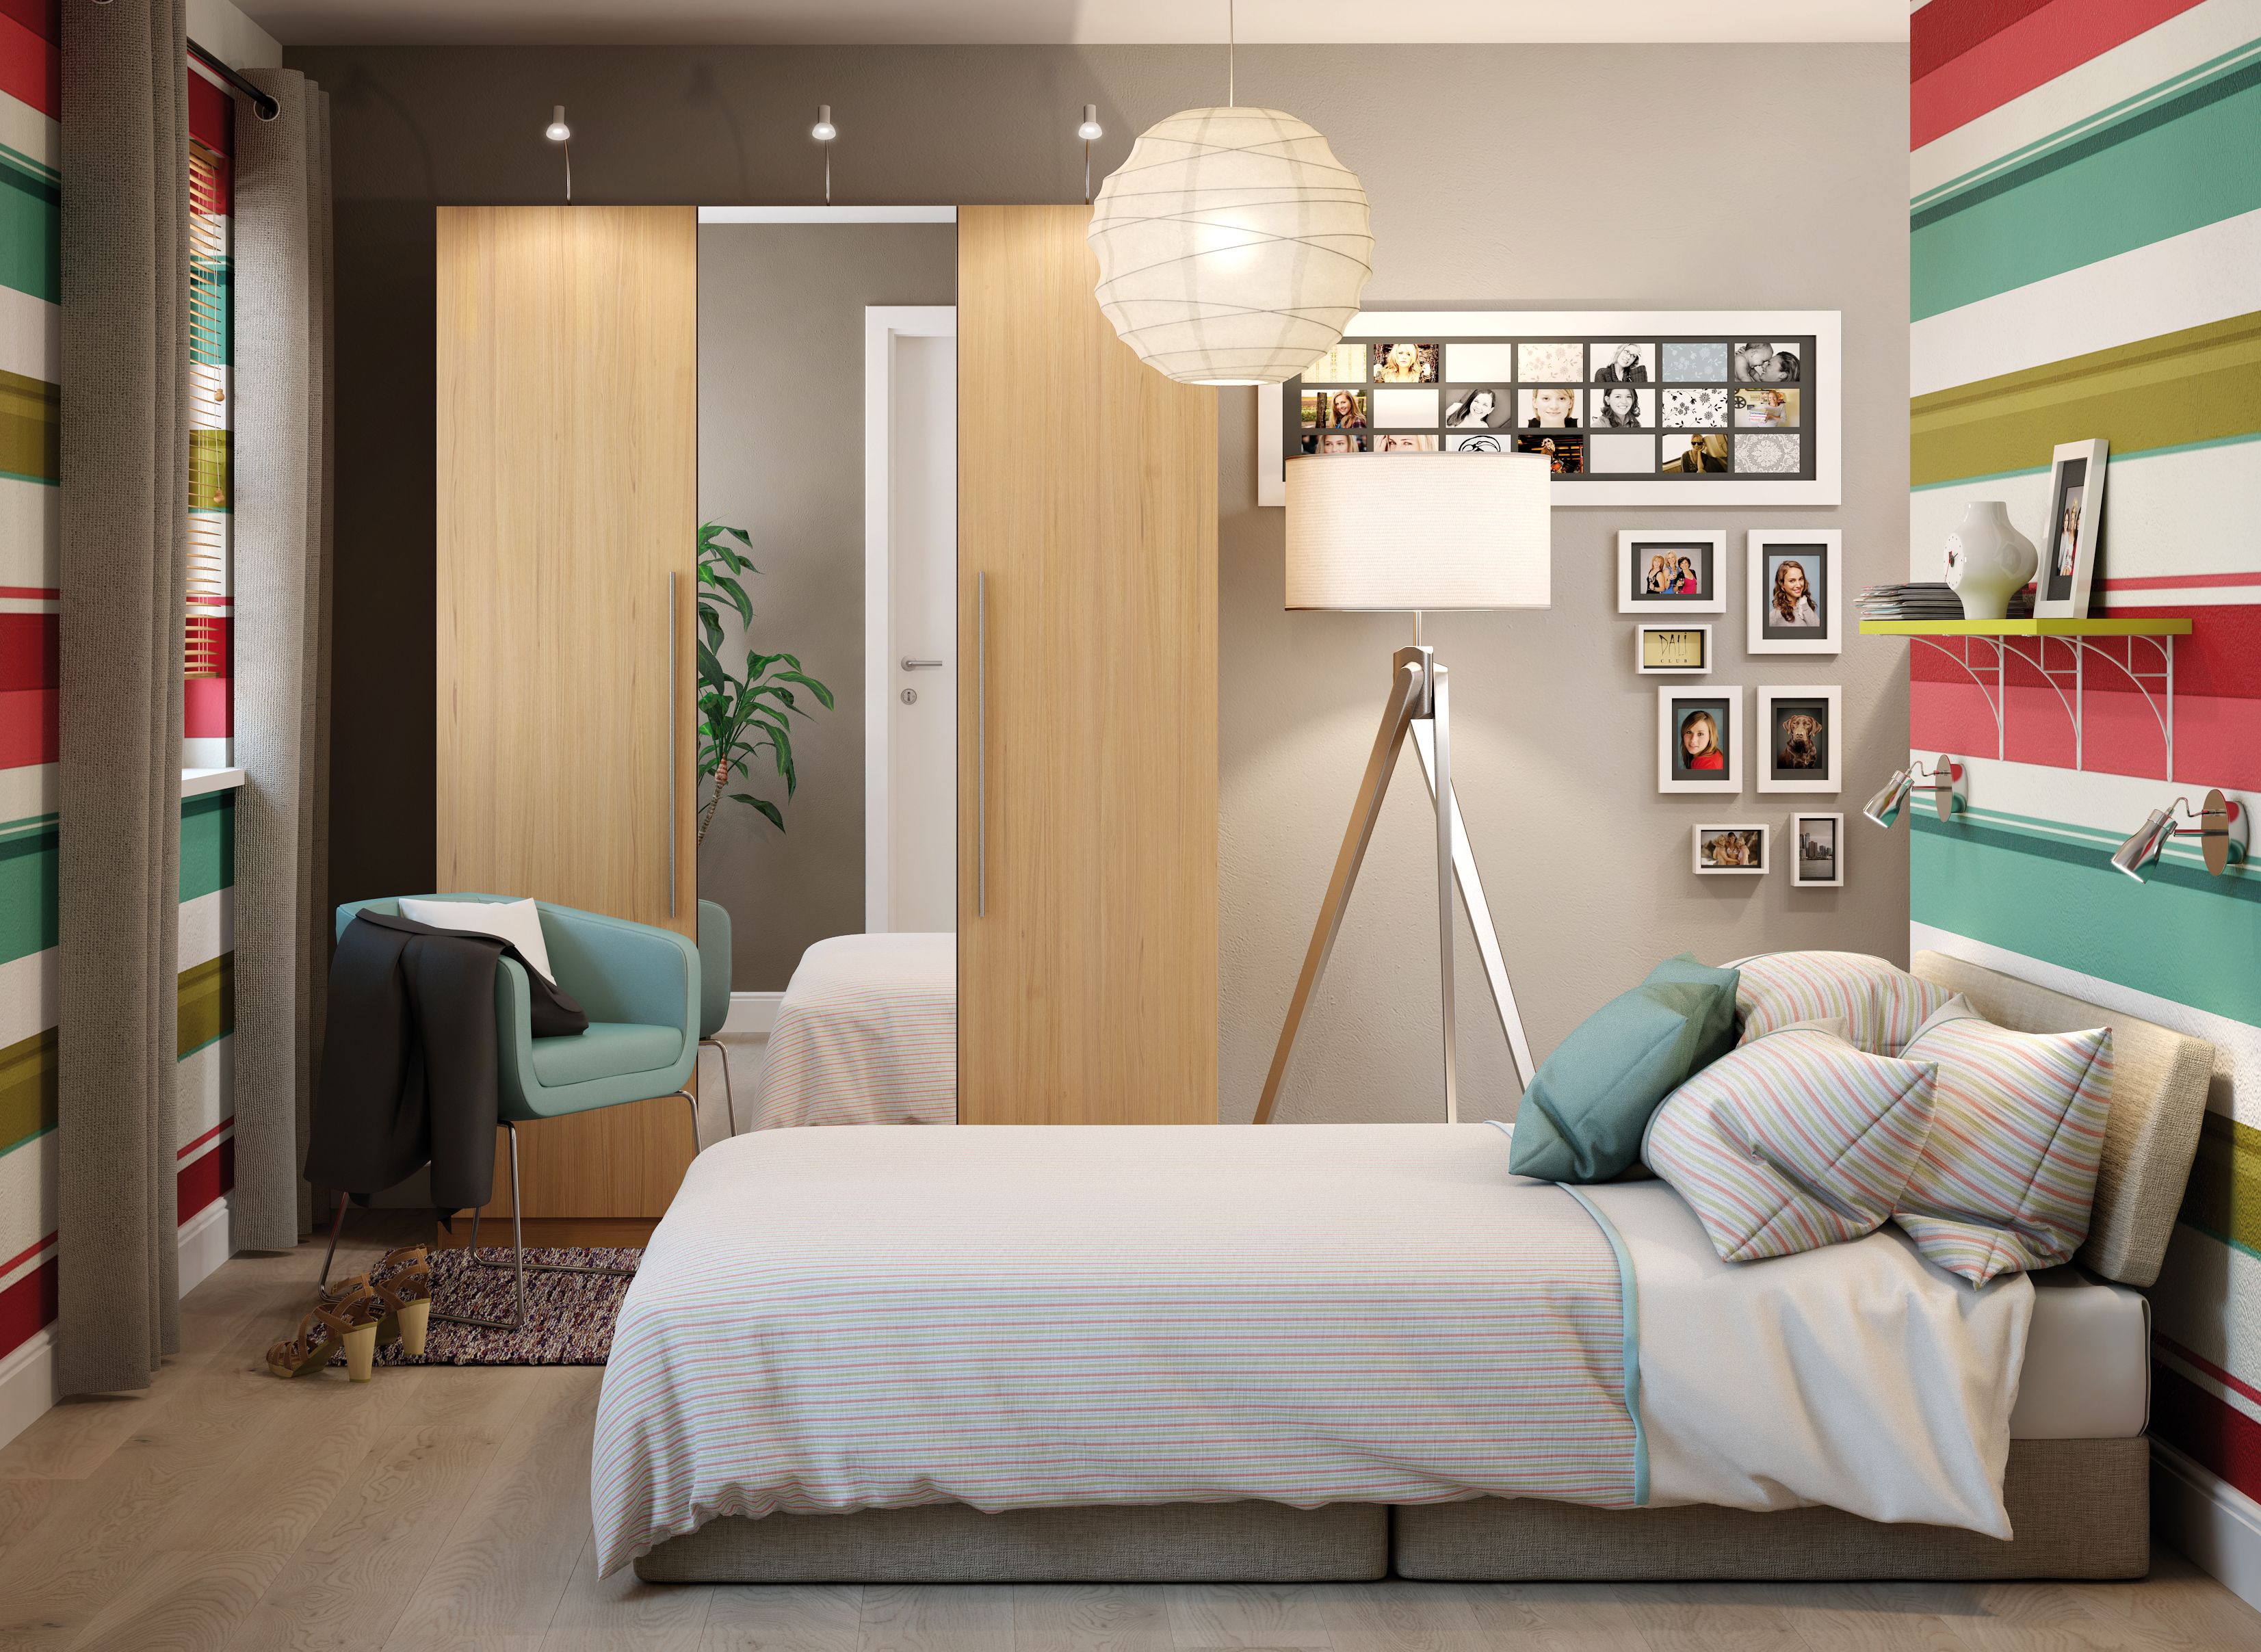 7 Steps To Planning A New Bedroom Ideas Advice DIY At BQ